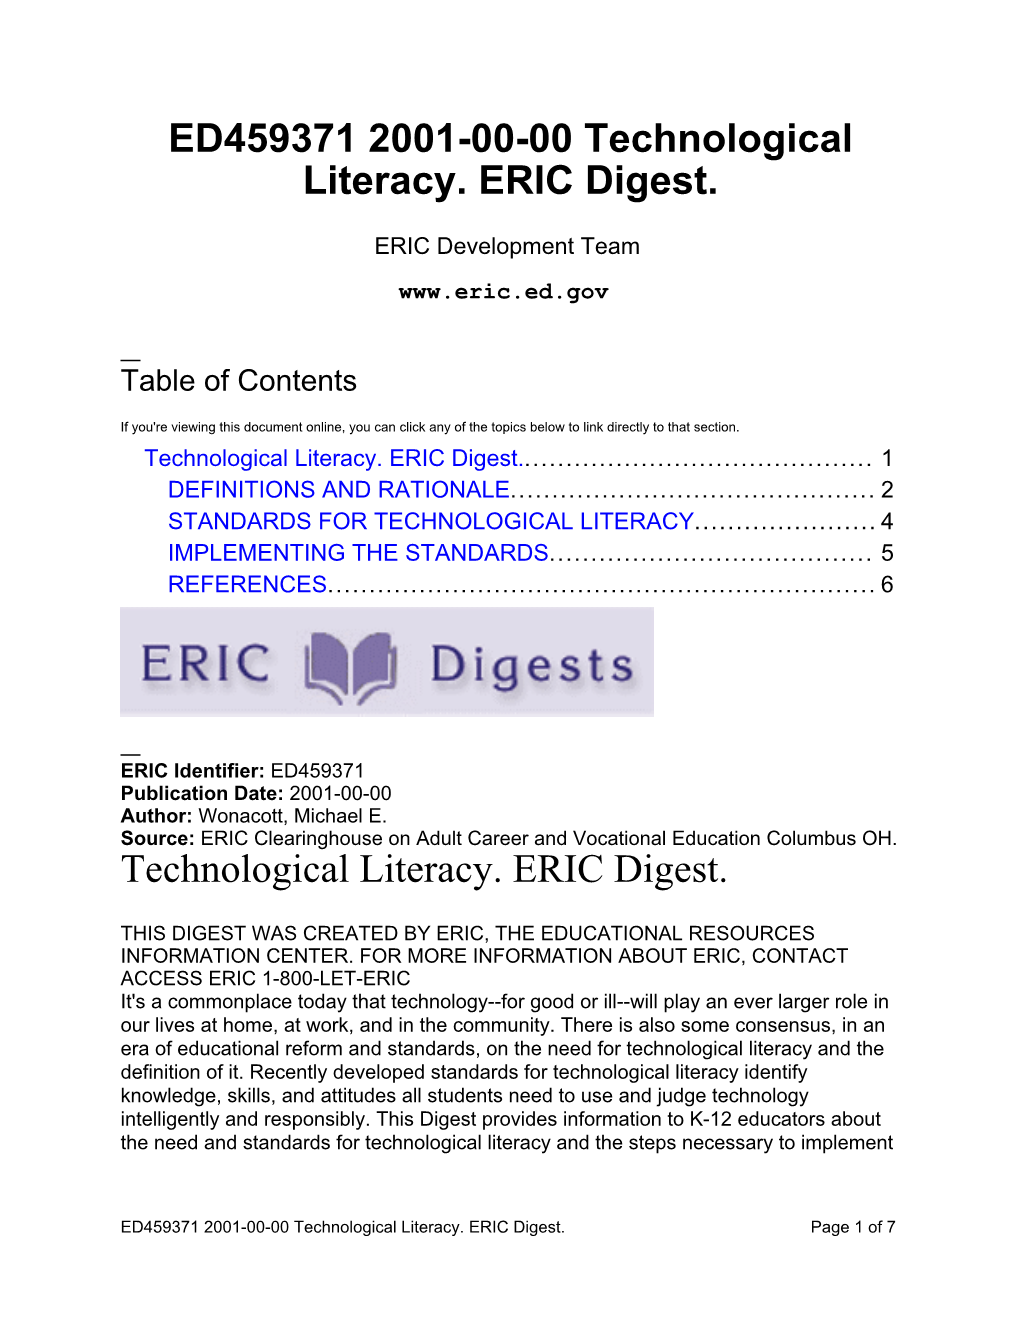 ED459371 2001-00-00 Technological Literacy. ERIC Digest